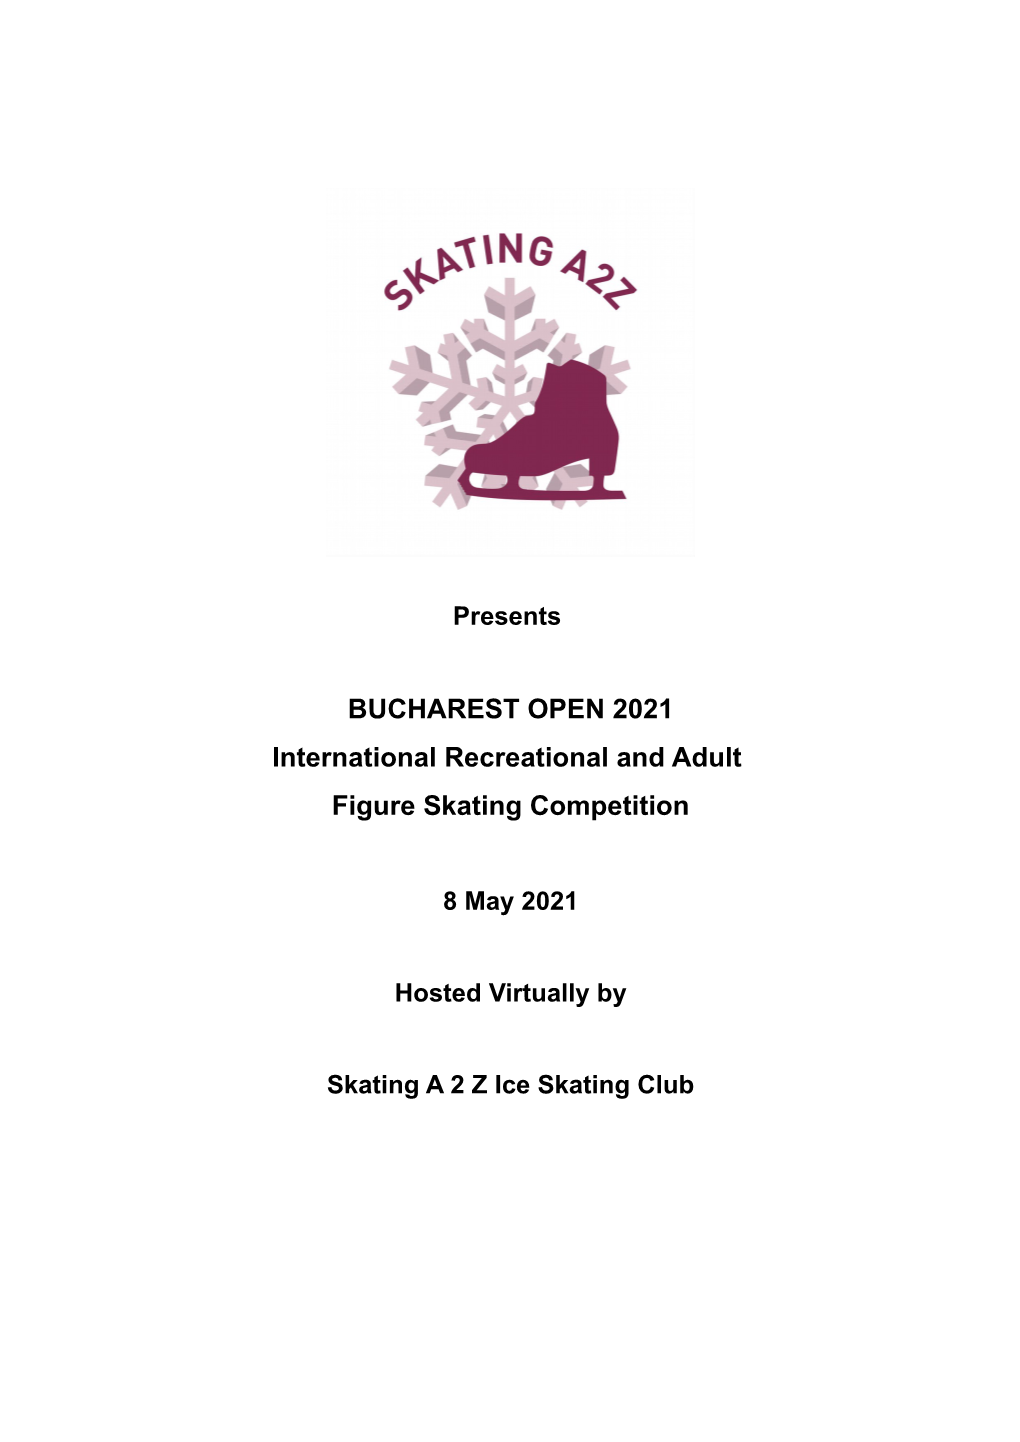 BUCHAREST OPEN 2021 International Recreational and Adult Figure Skating Competition